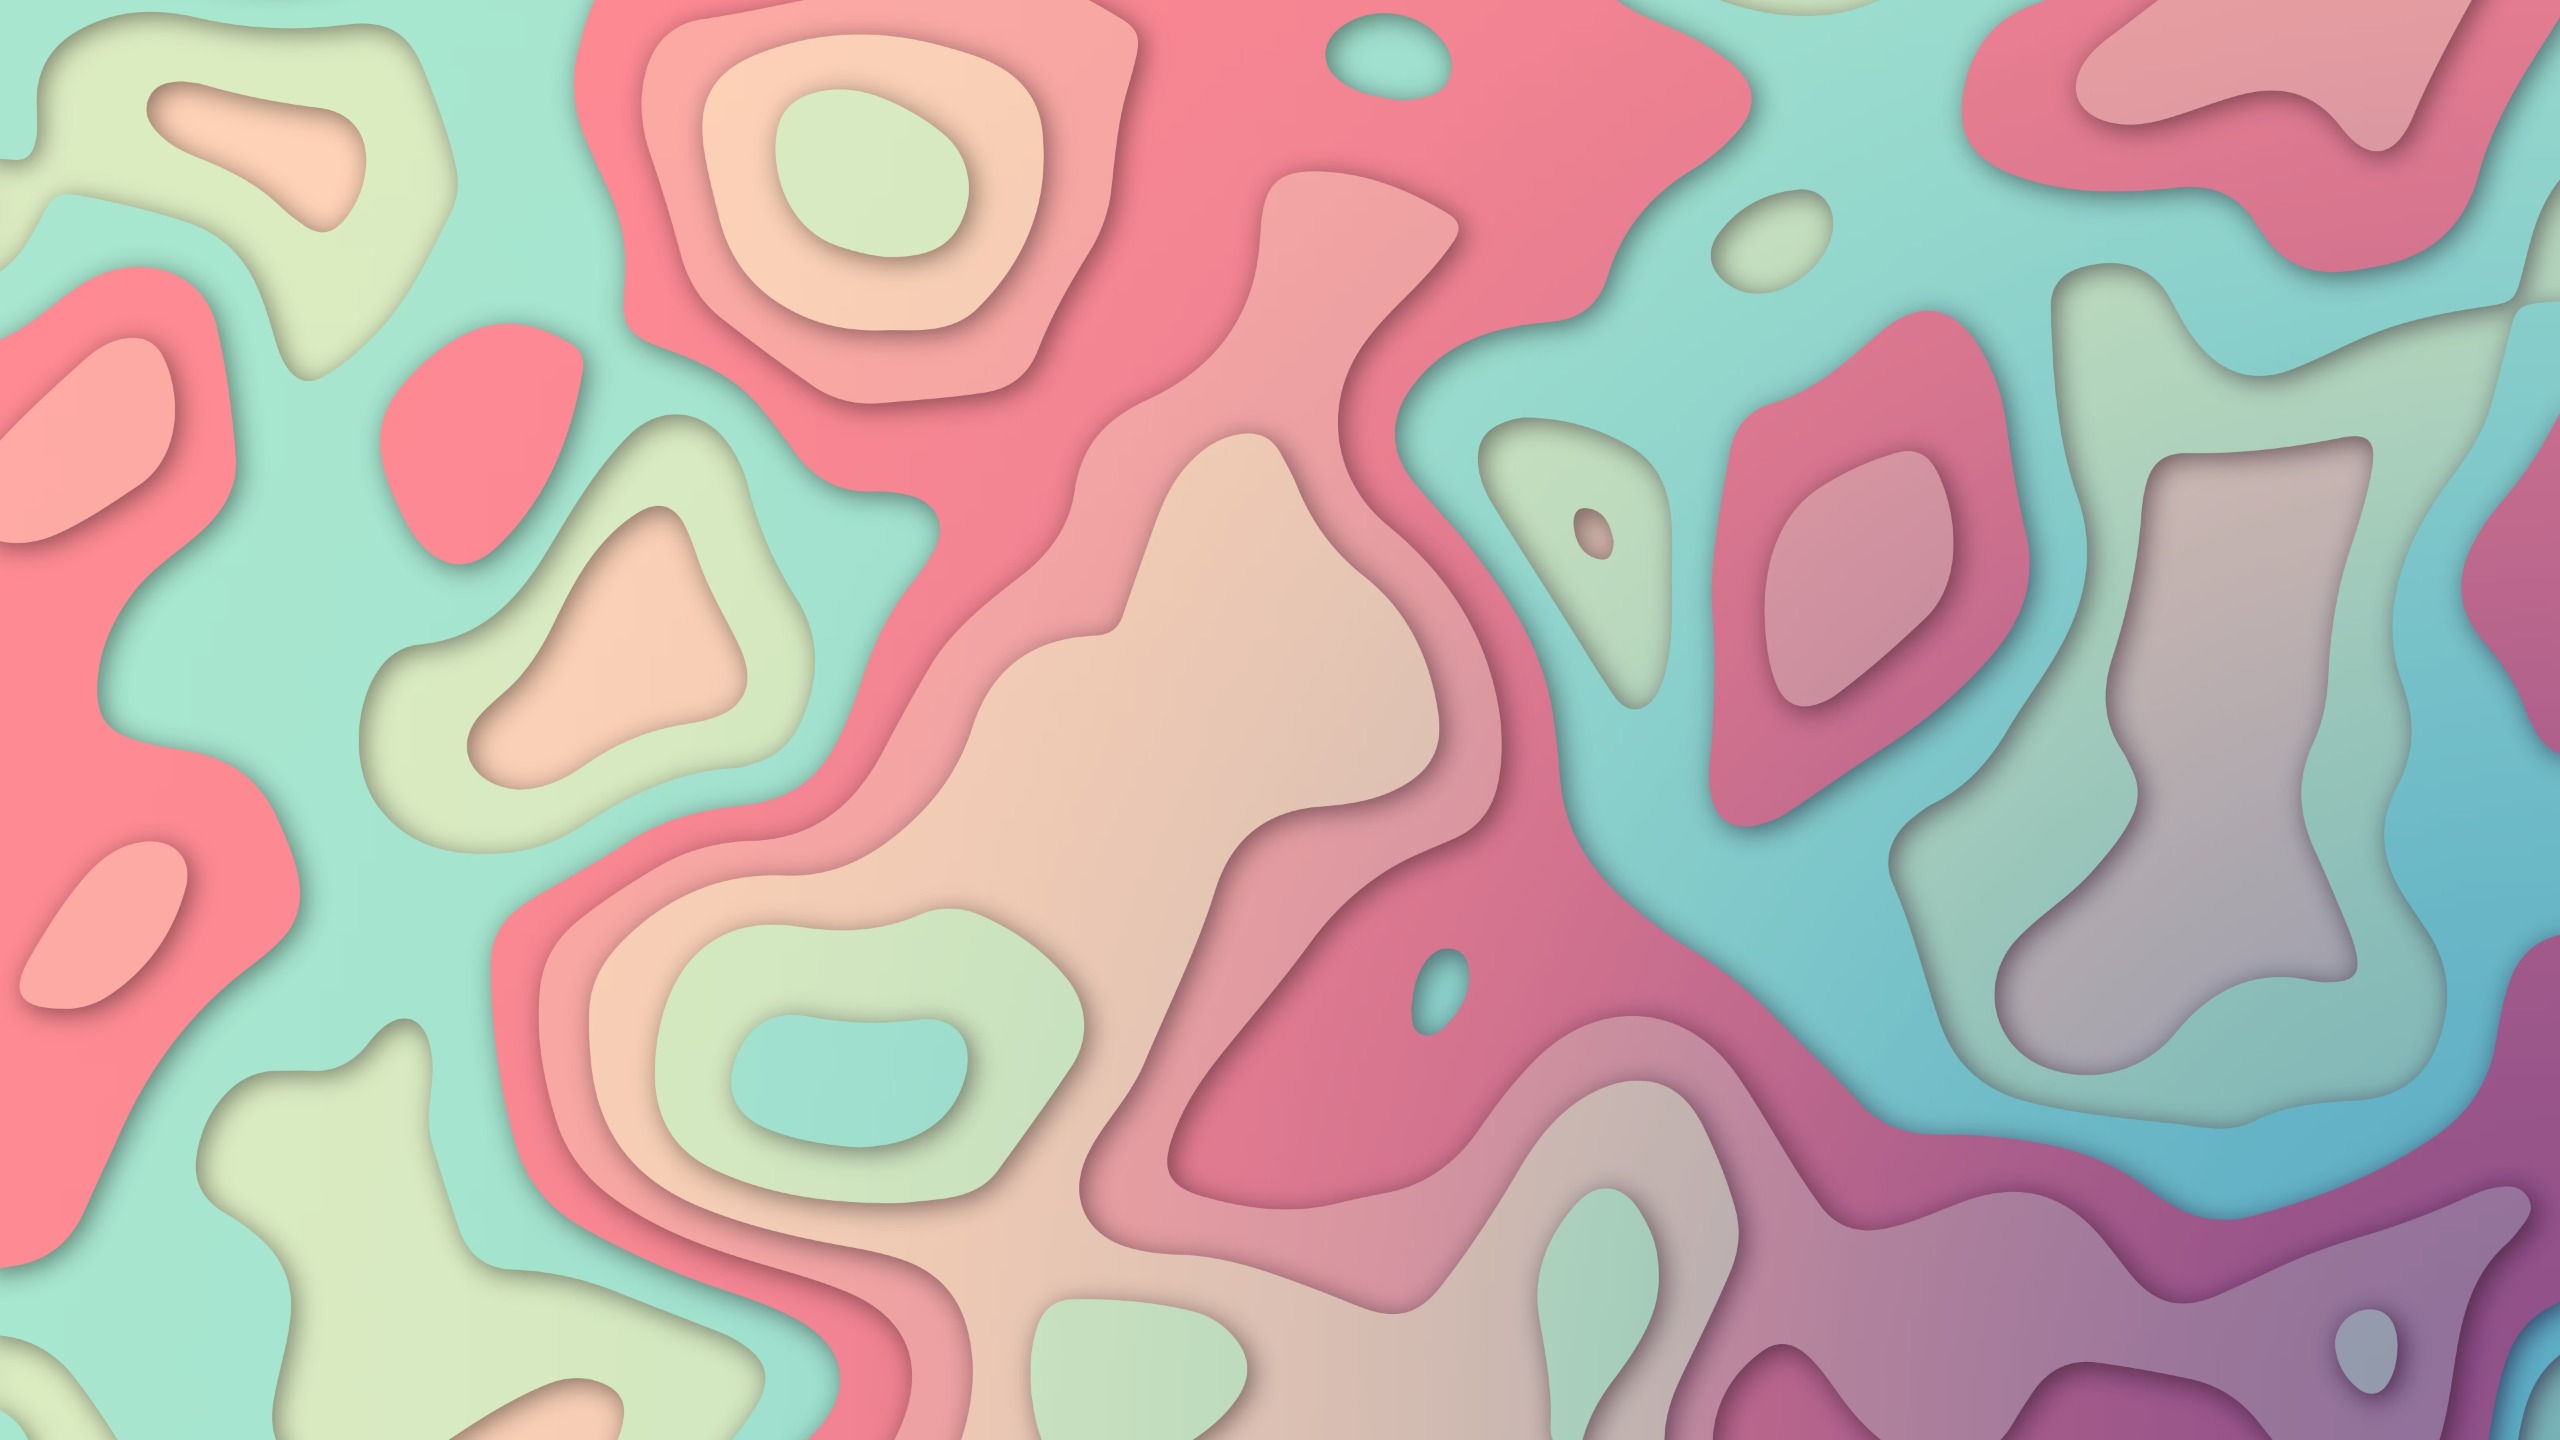 Pastel Slide Elevation Colorful Abstract 1440p